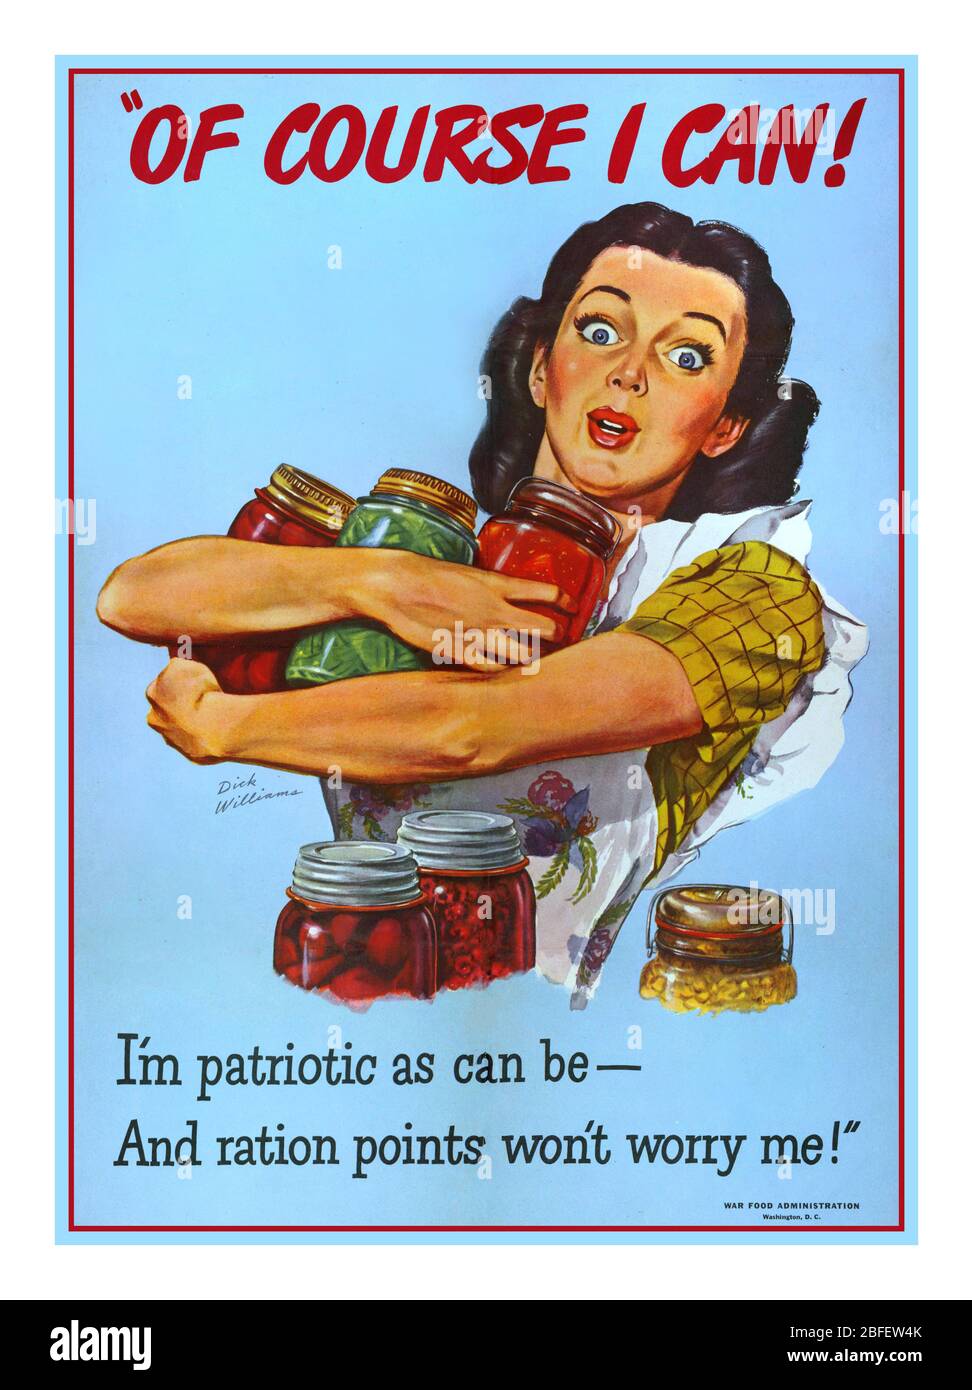 Vintage American WW2 Food Rationing Propaganda Poster  ’Of Course I Can! I'm patriotic as can be - And ration points won't worry me!’  War Food Administration. Self Sufficient Stock Pile Food Production War Posters - World War II 1944 Poster Stock Photo